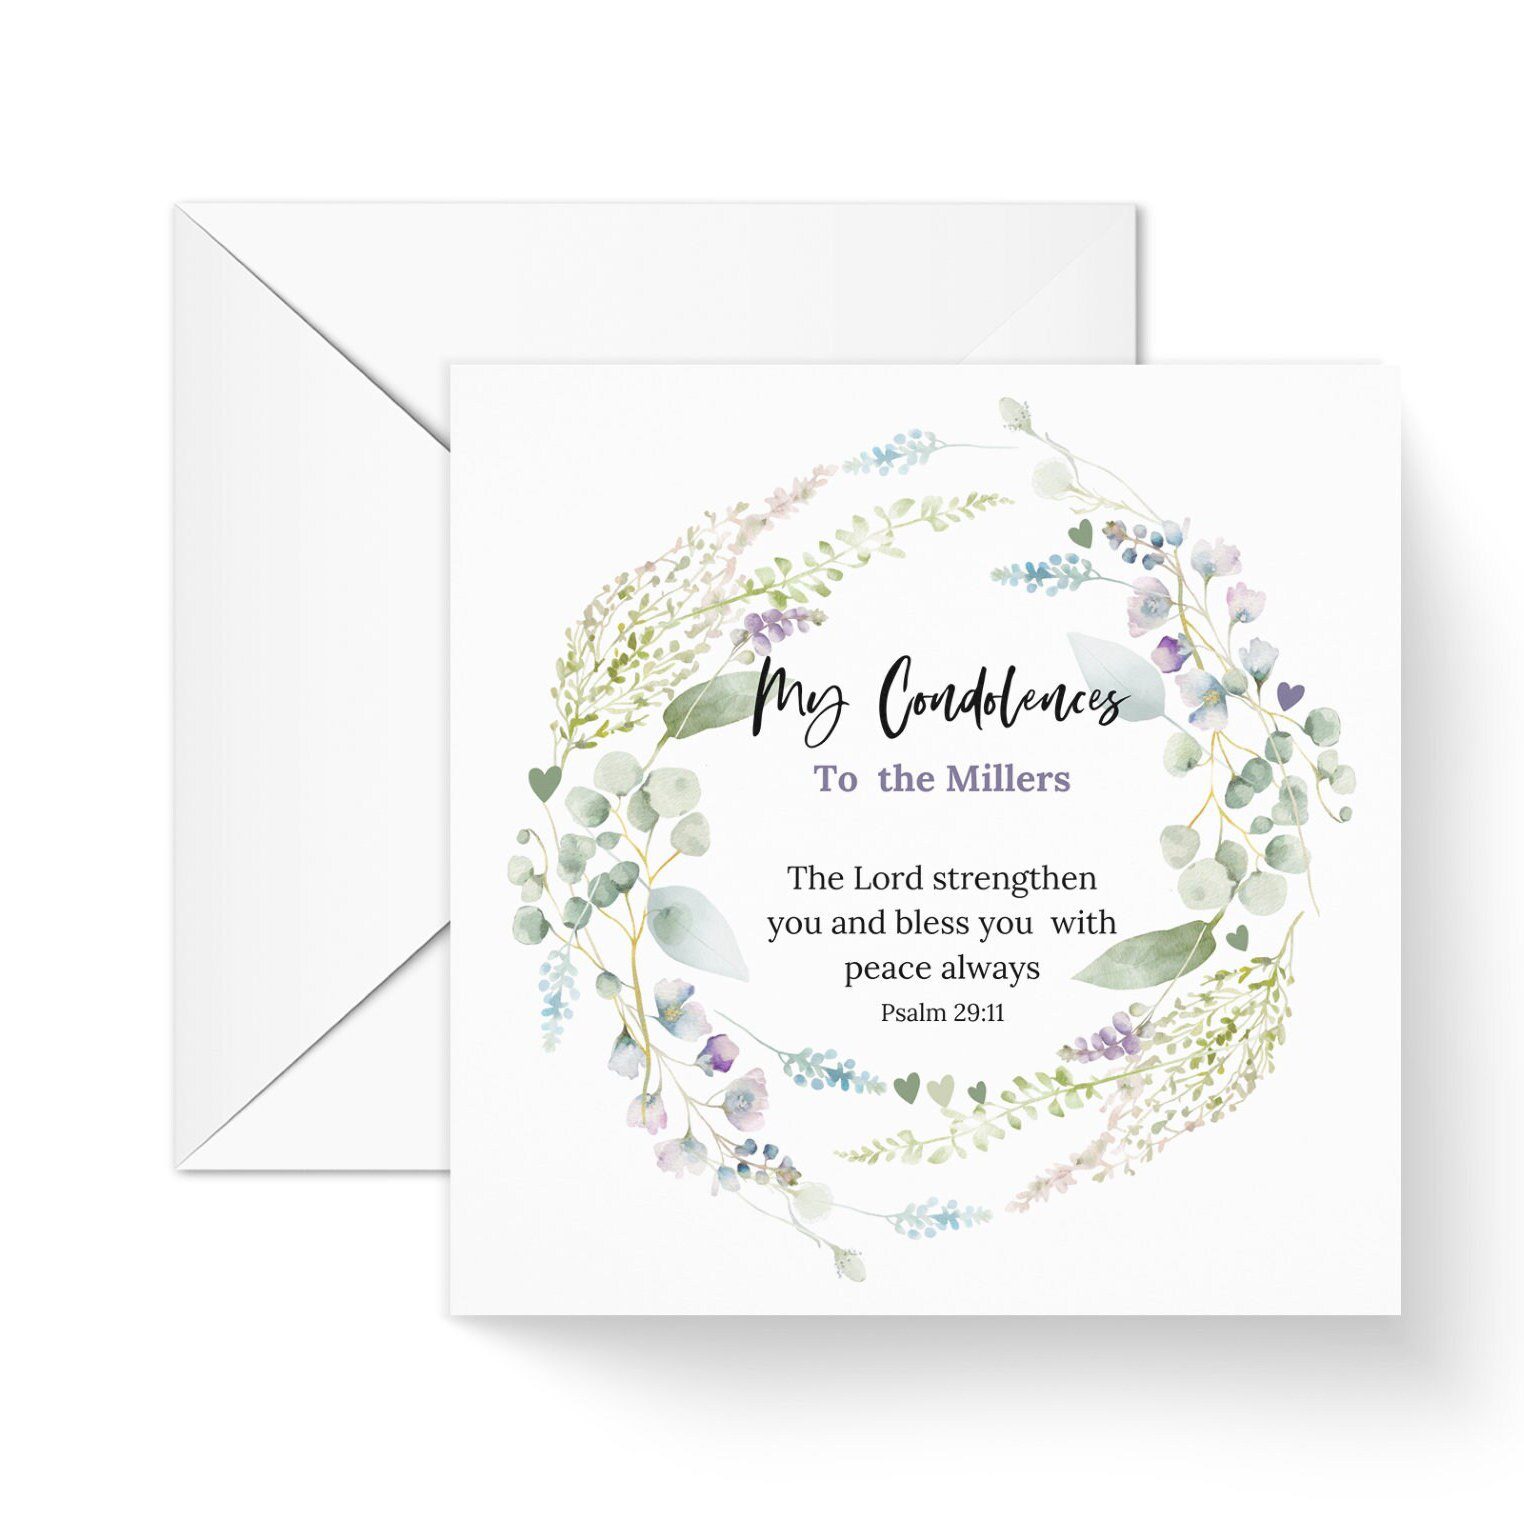 Personalised Condolence Scripture Greeting Card